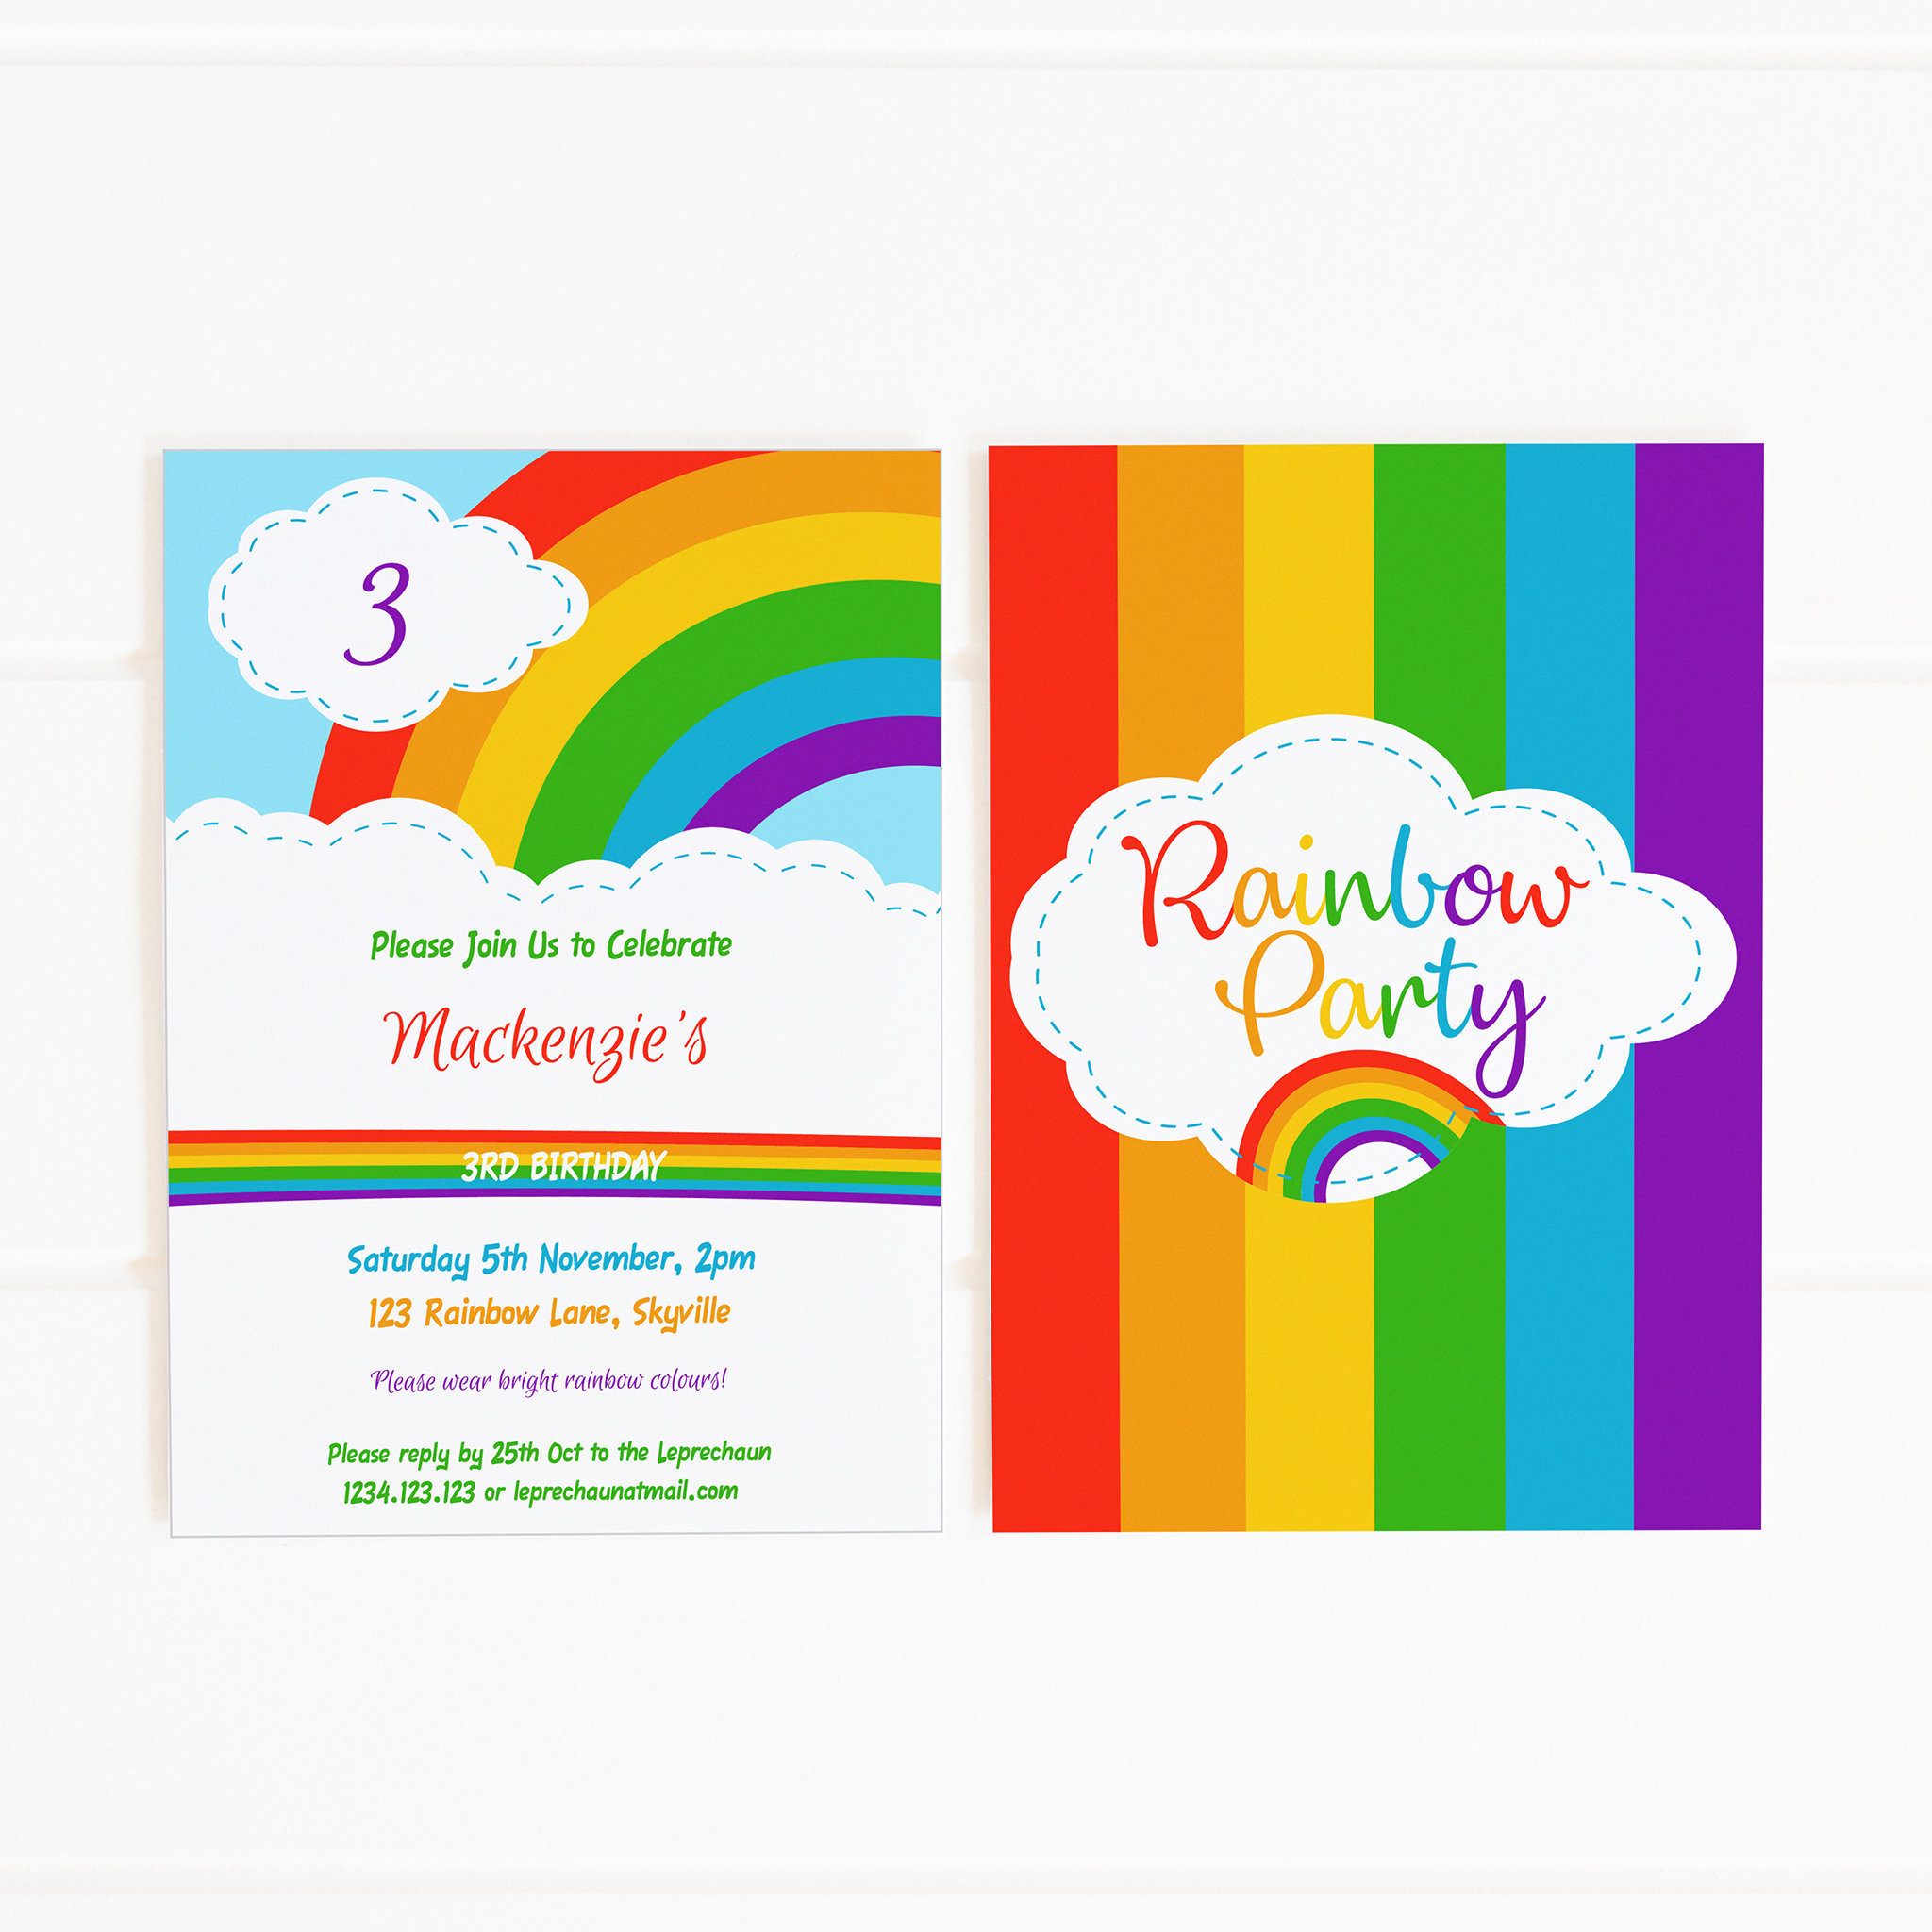 Rainbow Party Invitation Template • Business Template Ideas